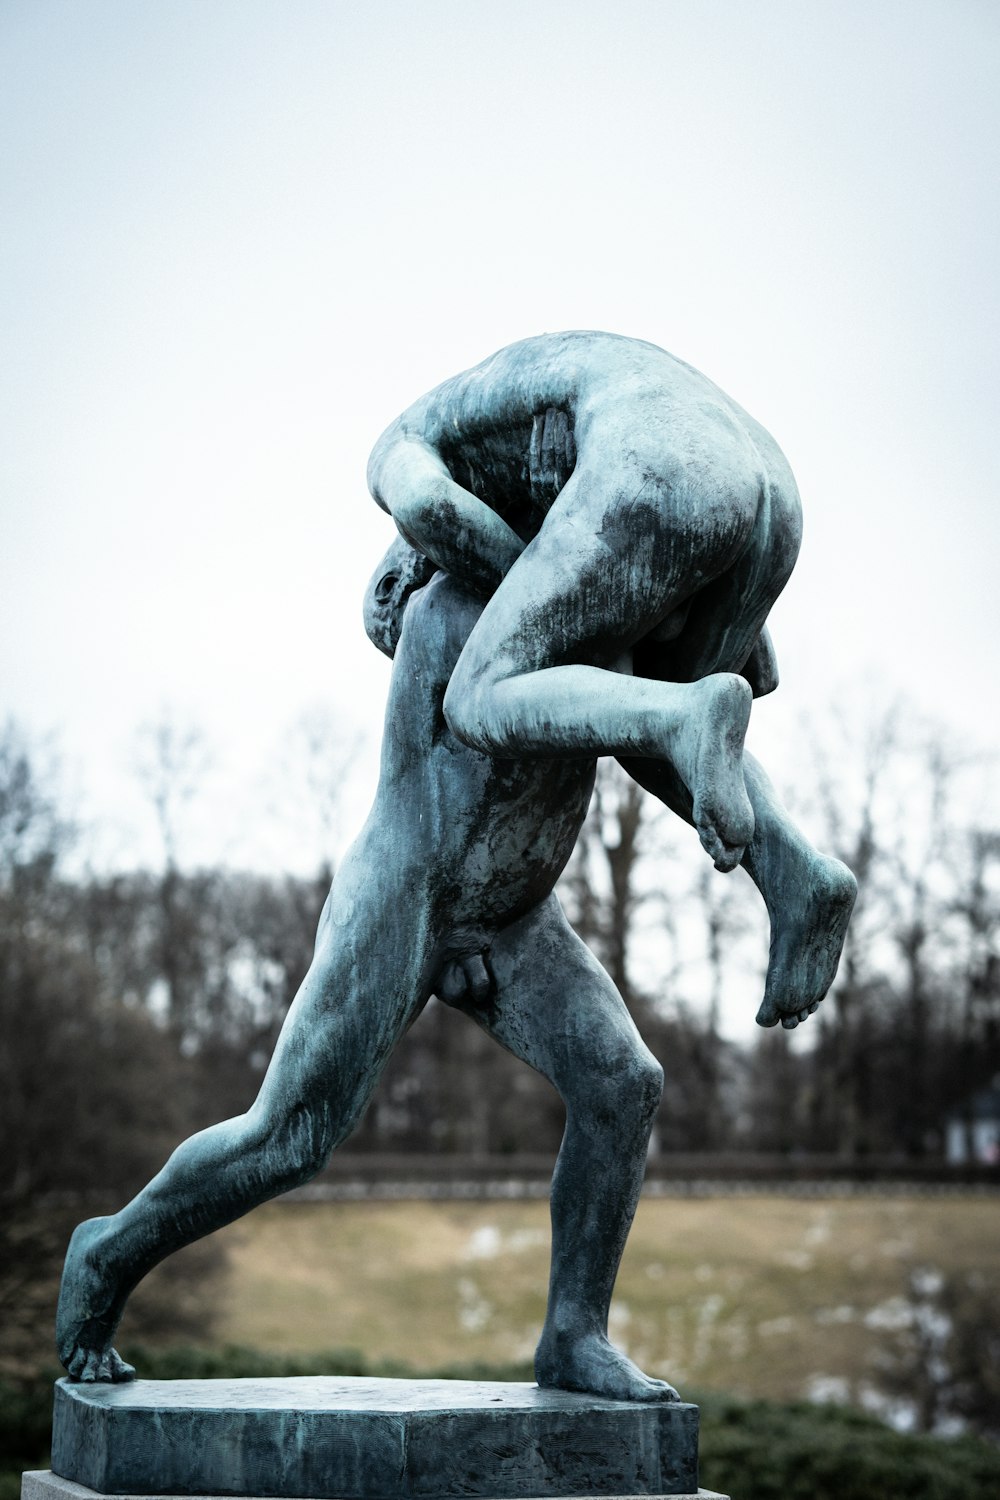 a statue of a man wrestling with another man